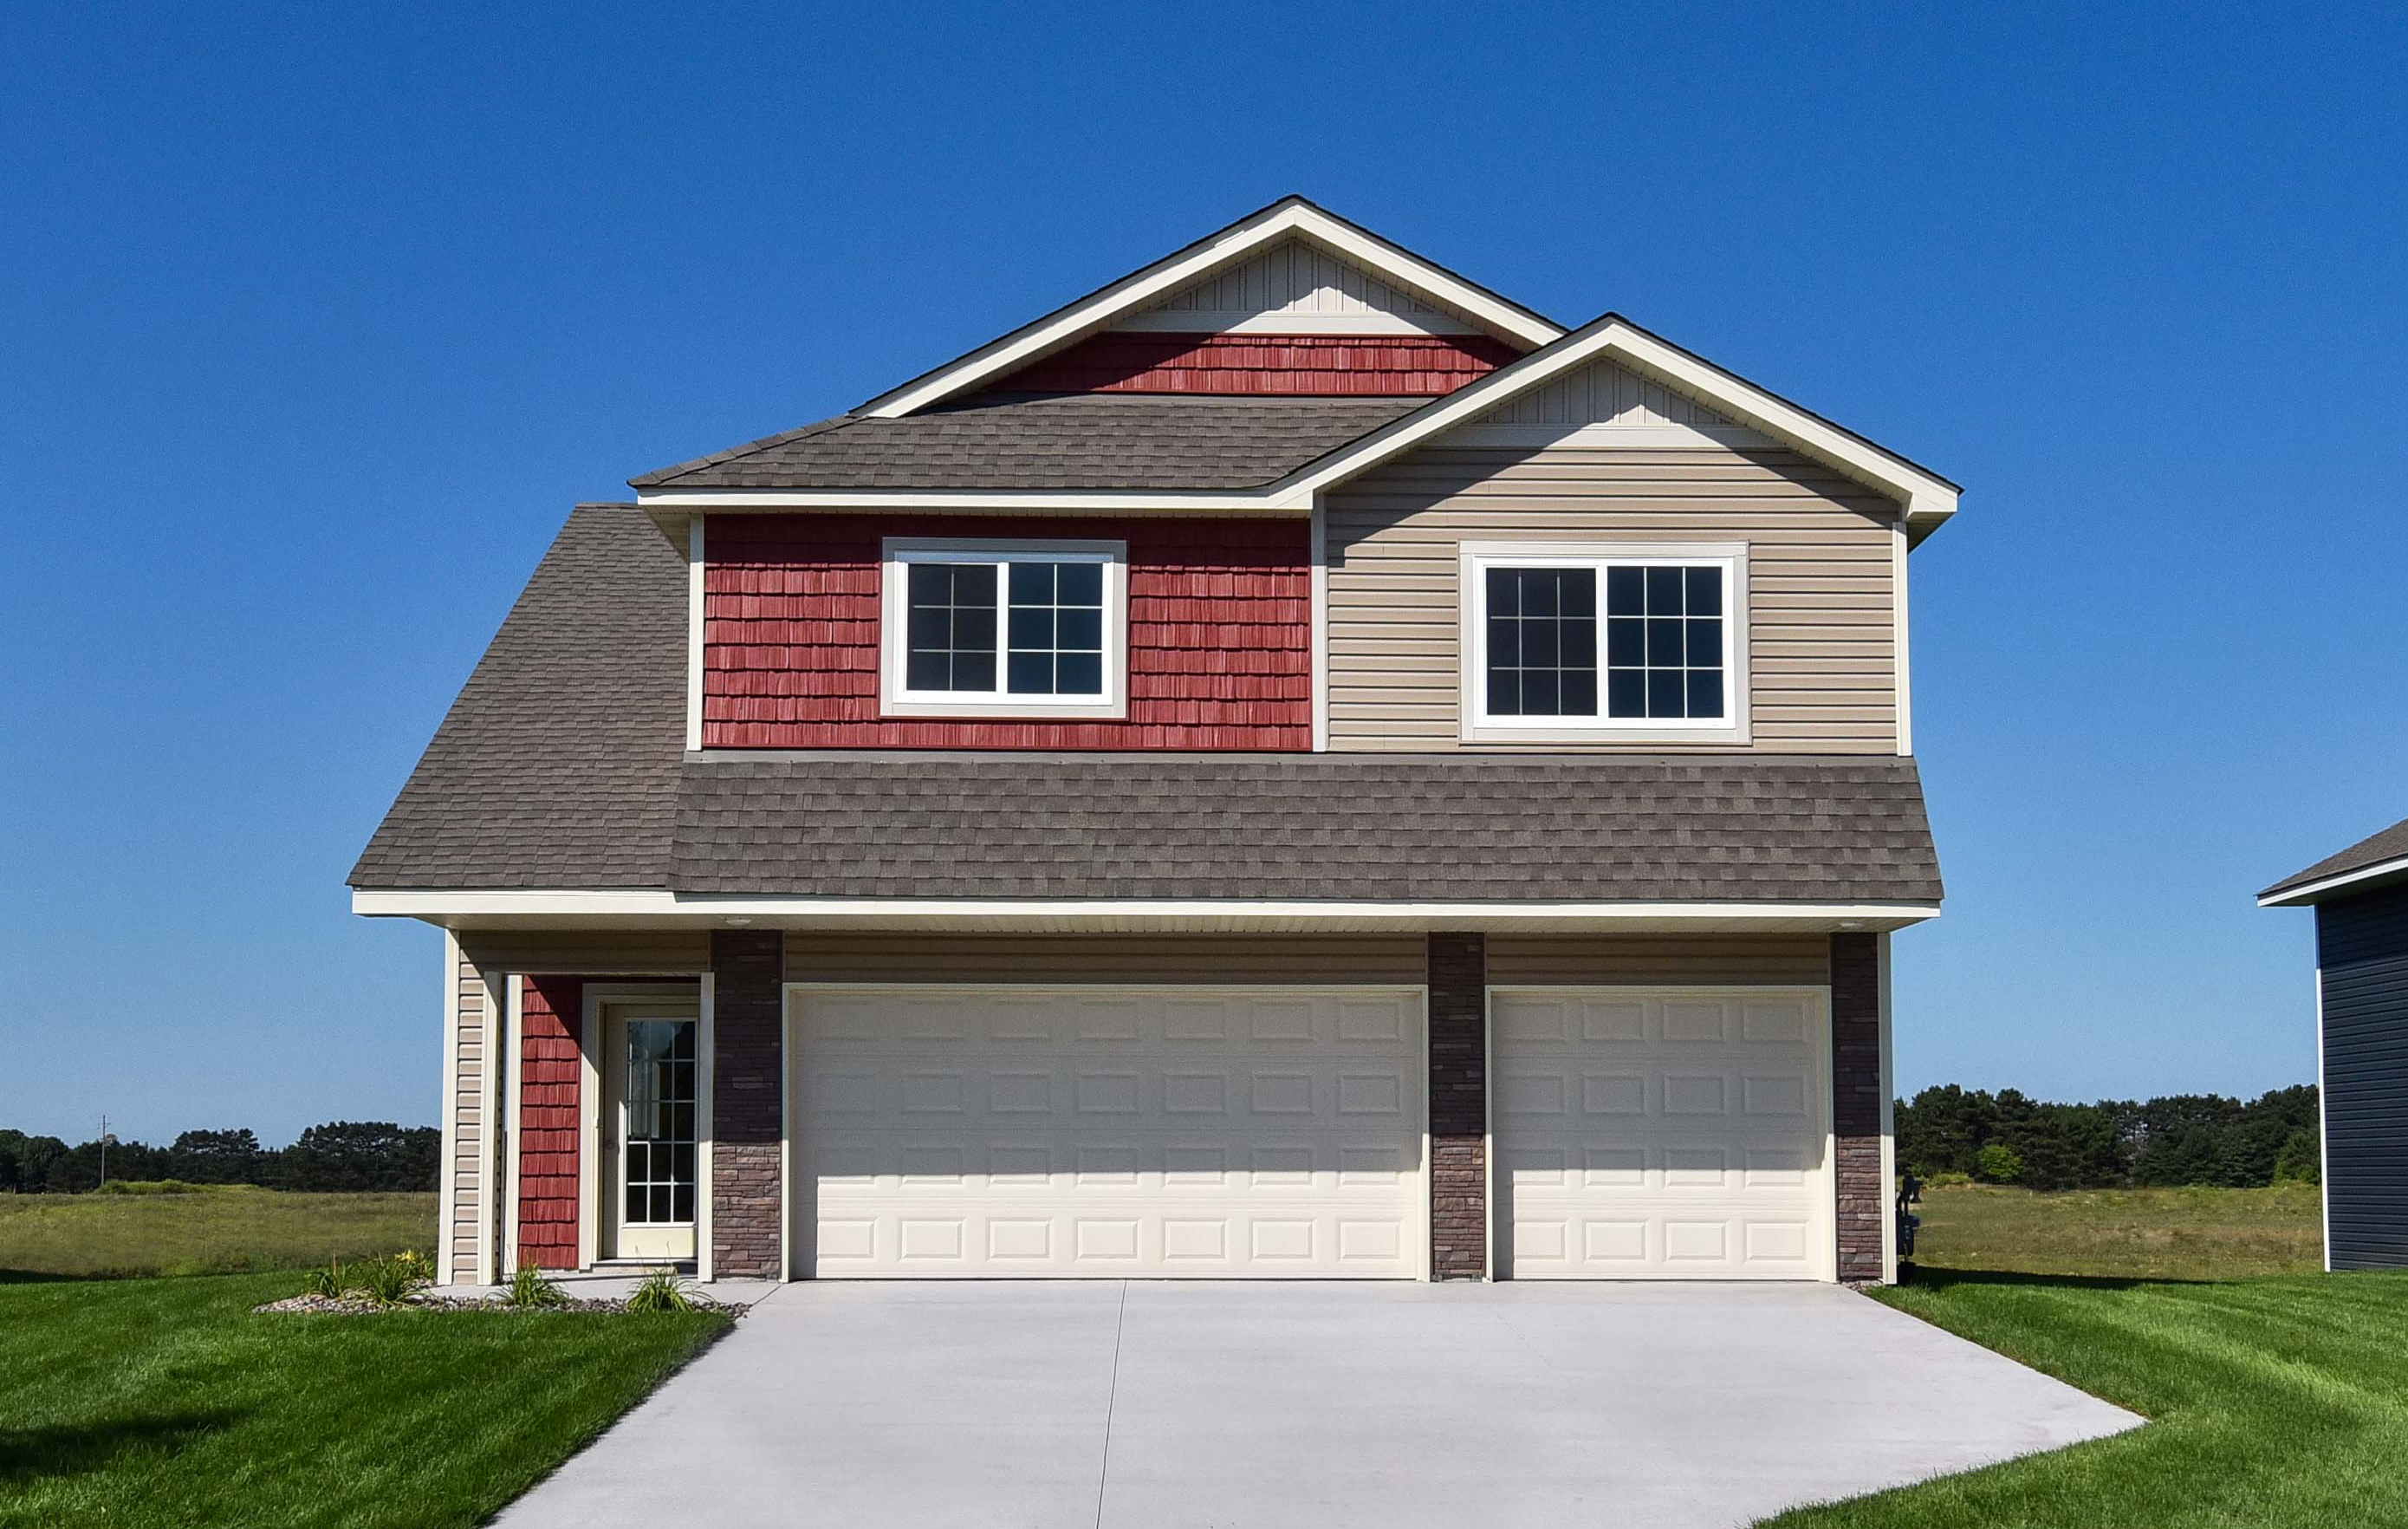 The St. Harrison Plan by LGI Homes at Miske Meadows in Elk River features three bedrooms, two bathrooms and an unfinished walkout basement.